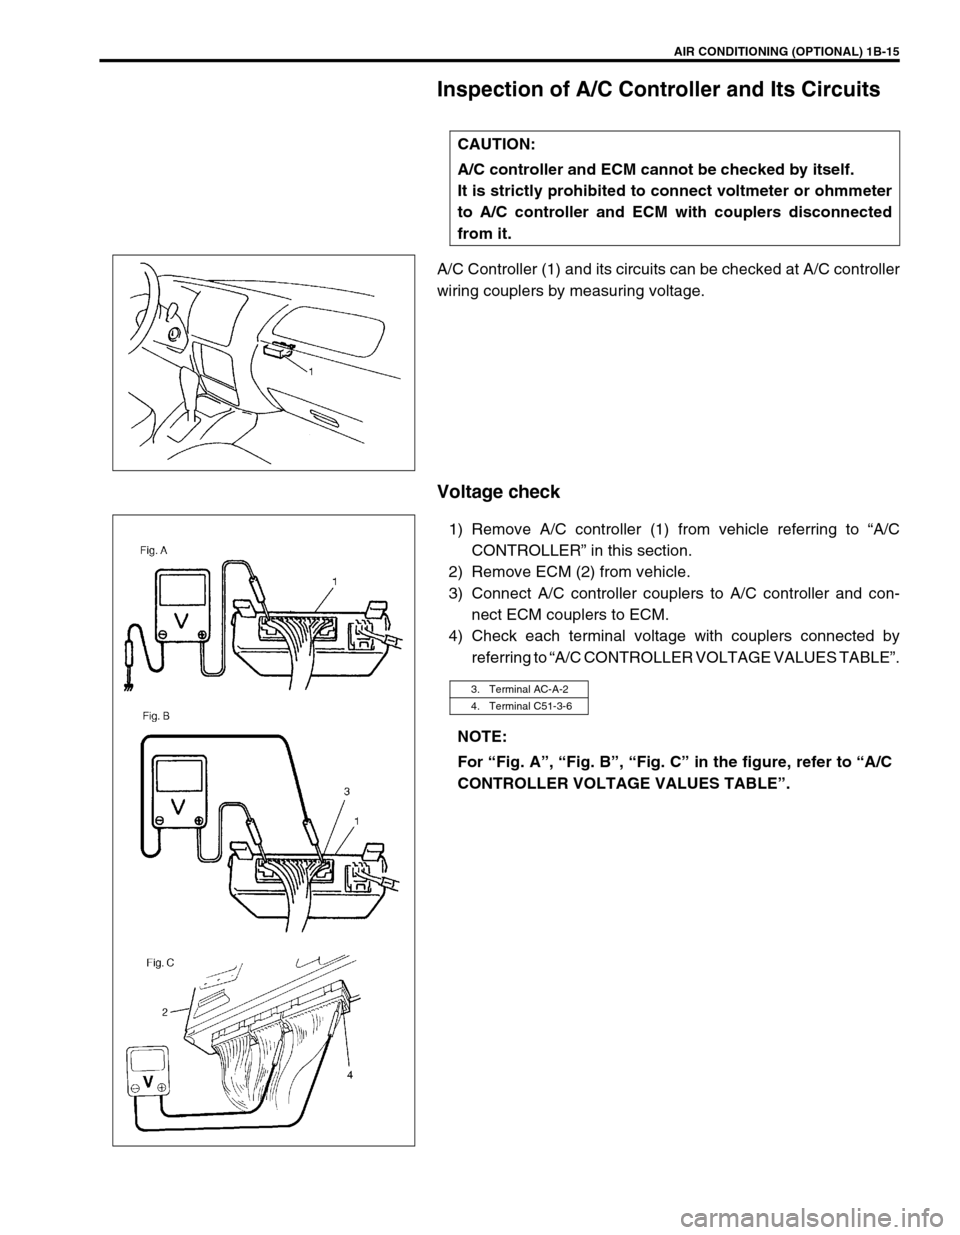 SUZUKI GRAND VITARA 1999 2.G Owners Guide AIR CONDITIONING (OPTIONAL) 1B-15
Inspection of A/C Controller and Its Circuits
A/C Controller (1) and its circuits can be checked at A/C controller
wiring couplers by measuring voltage.
Voltage check